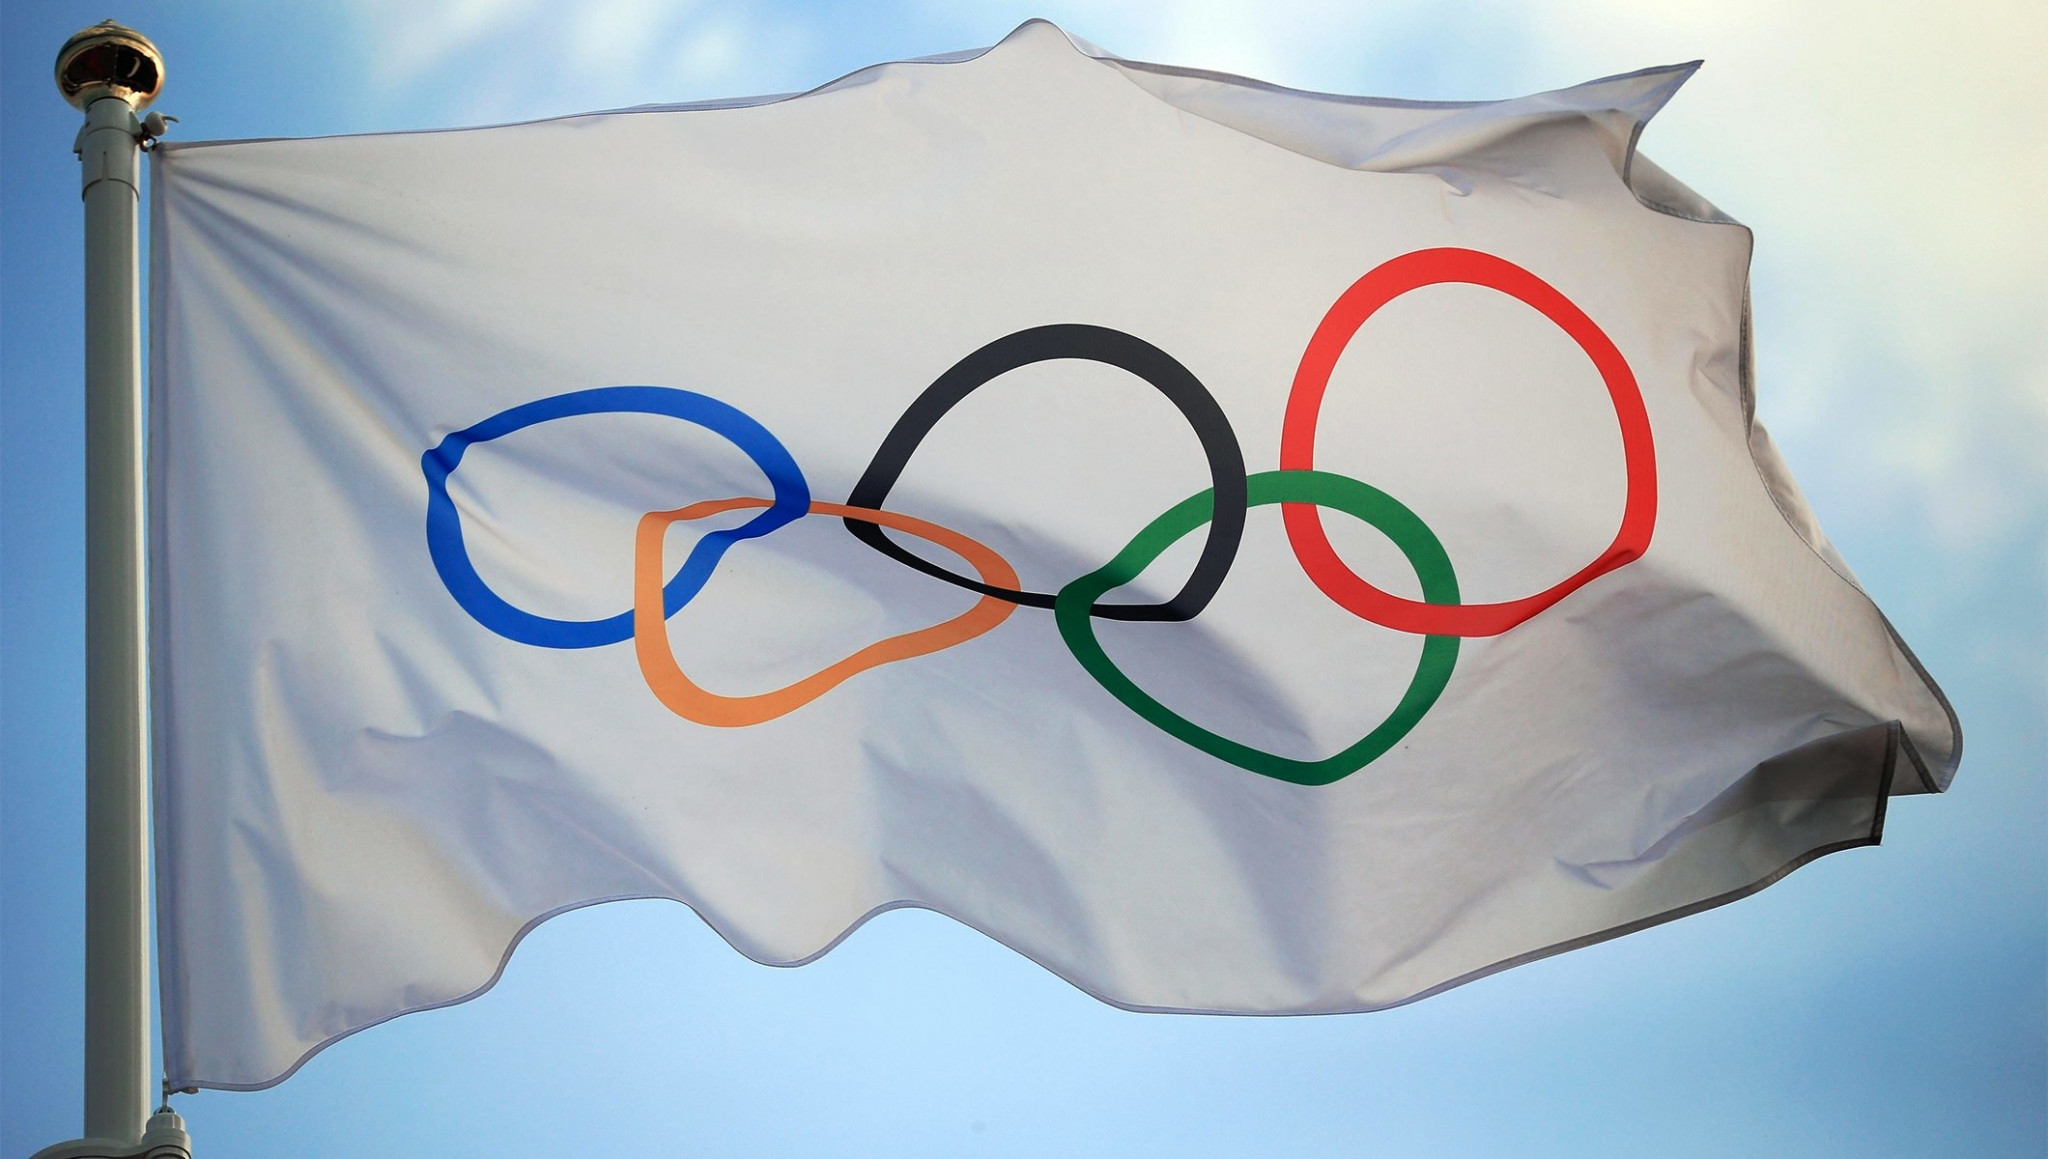 IOC reveal seven contenders interested in hosting 2026 Winter Olympic and Paralympic Games